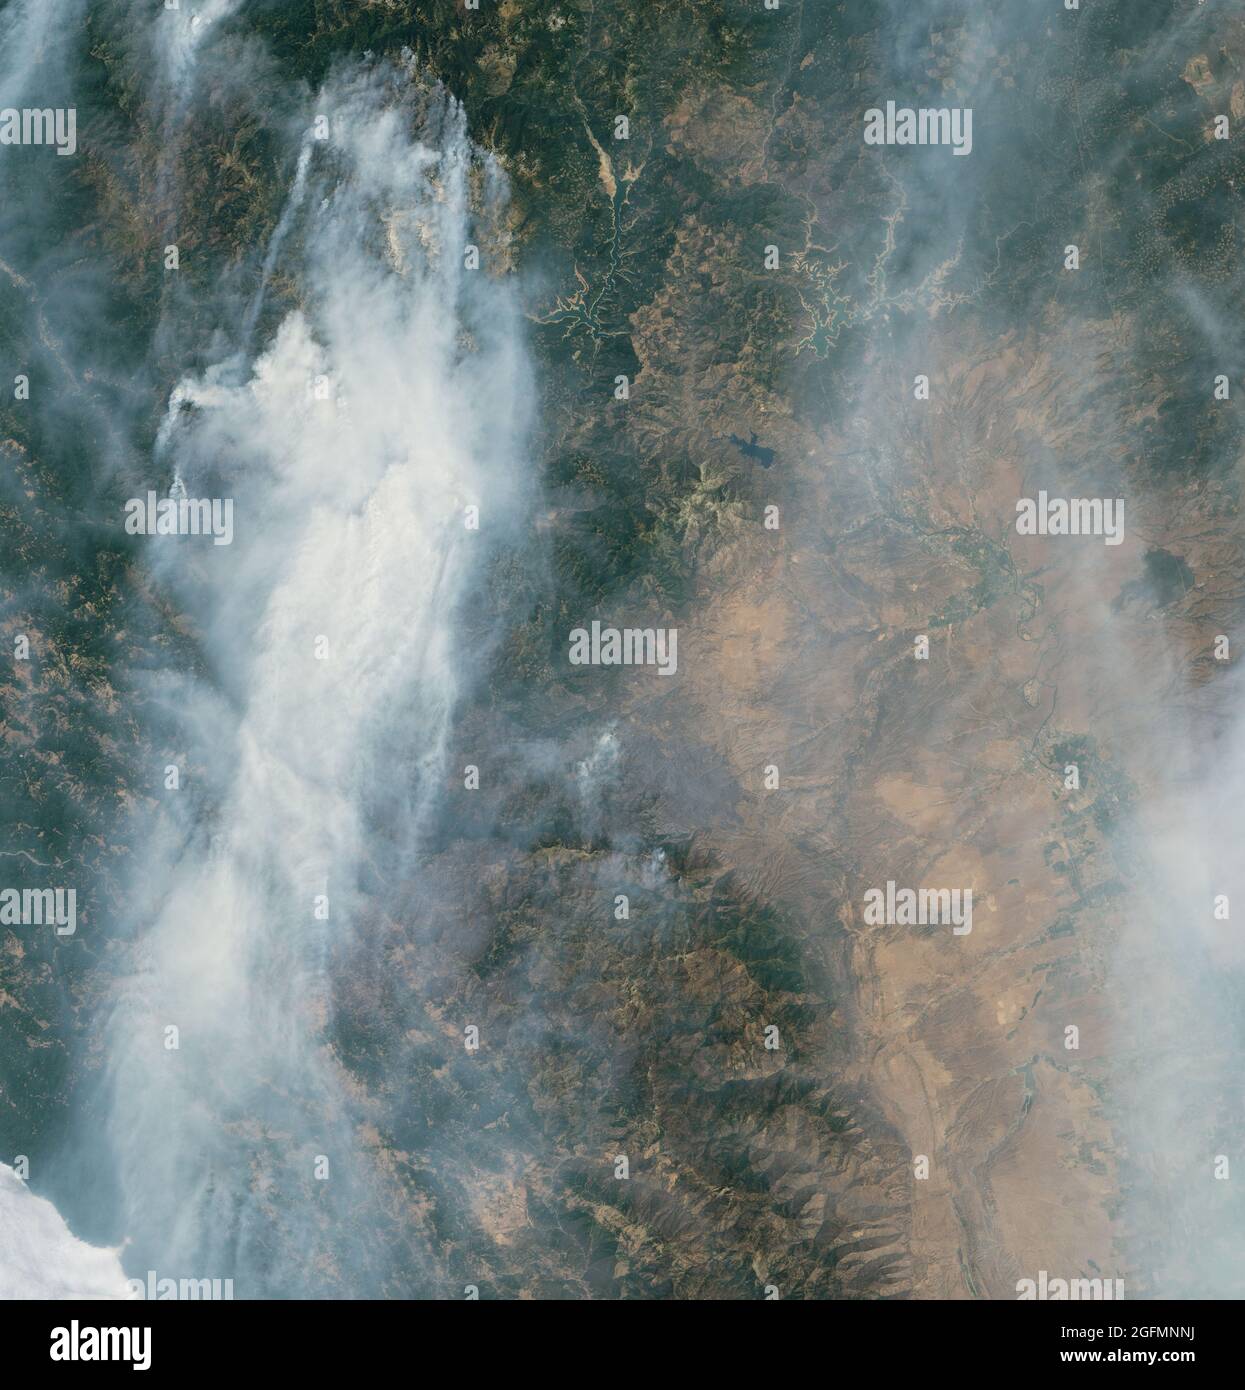 More than 11,000 firefighters are deployed in northern California battling these and several other fires. On August 19, the Operational Land Imager (OLI) on Landsat 8 acquired a closer view (second image) of two blazes—the Monument and McFarland fires, the second- and third-largest fires currently burning in California. The McFarland fire was 52 percent contained on August 20; the Monument fire was 10 percent contained.  Emissions from California’s wildfires are adding up. According to Mark Parrington, a scientist with the European Centre for Medium-Range Weather Forecasts, estimates of carbon Stock Photo